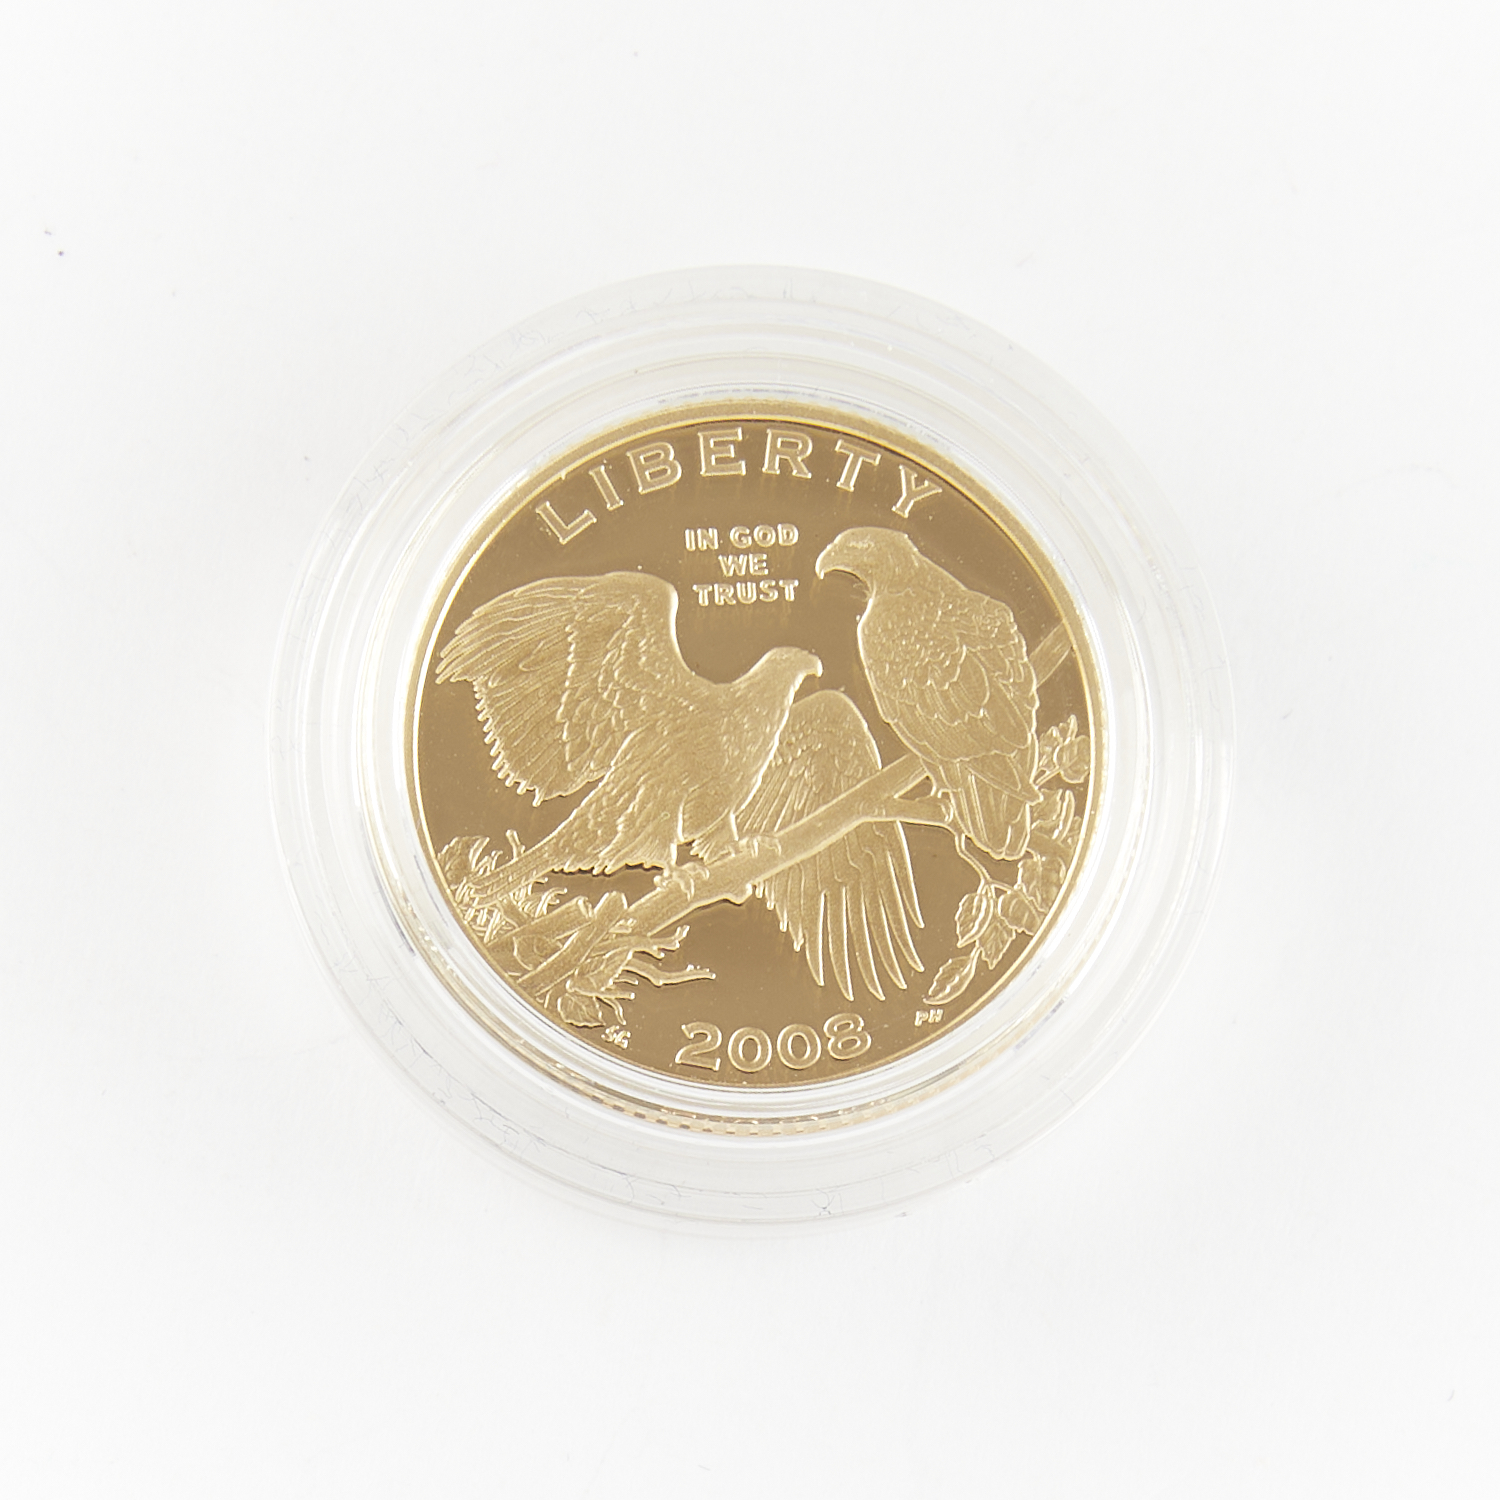 2008 $5 Gold American Eagle Proof Coin - Image 2 of 3